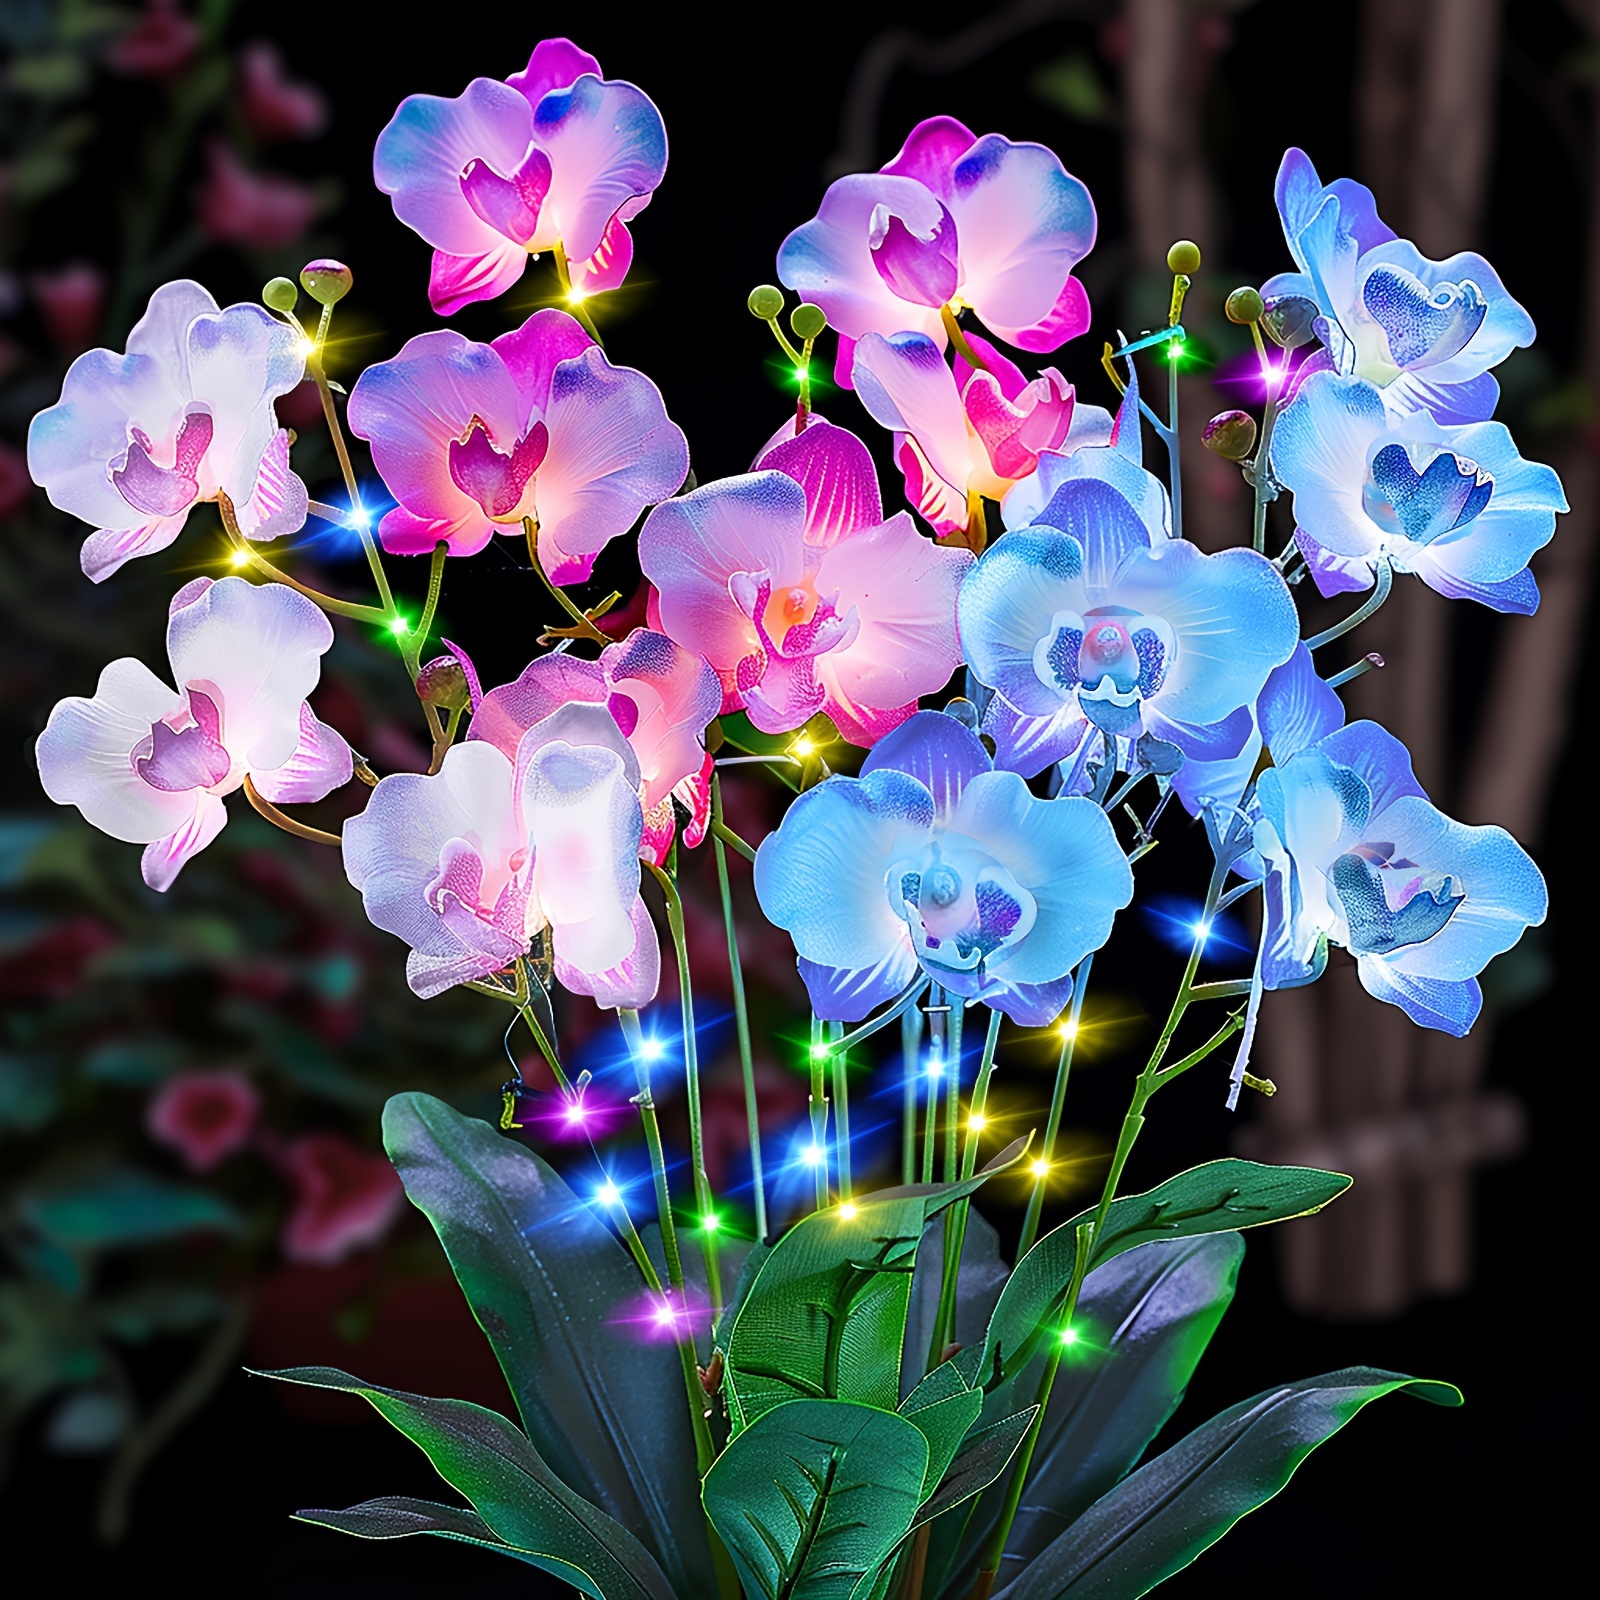 

Outdoor Decorative: 3 Pack Solar Phalaenopsis Flower Lights, Solar Flowers Outdoor, Solar Lights For Outside Yard Patio Pathway Decorations (white+pink+blue)